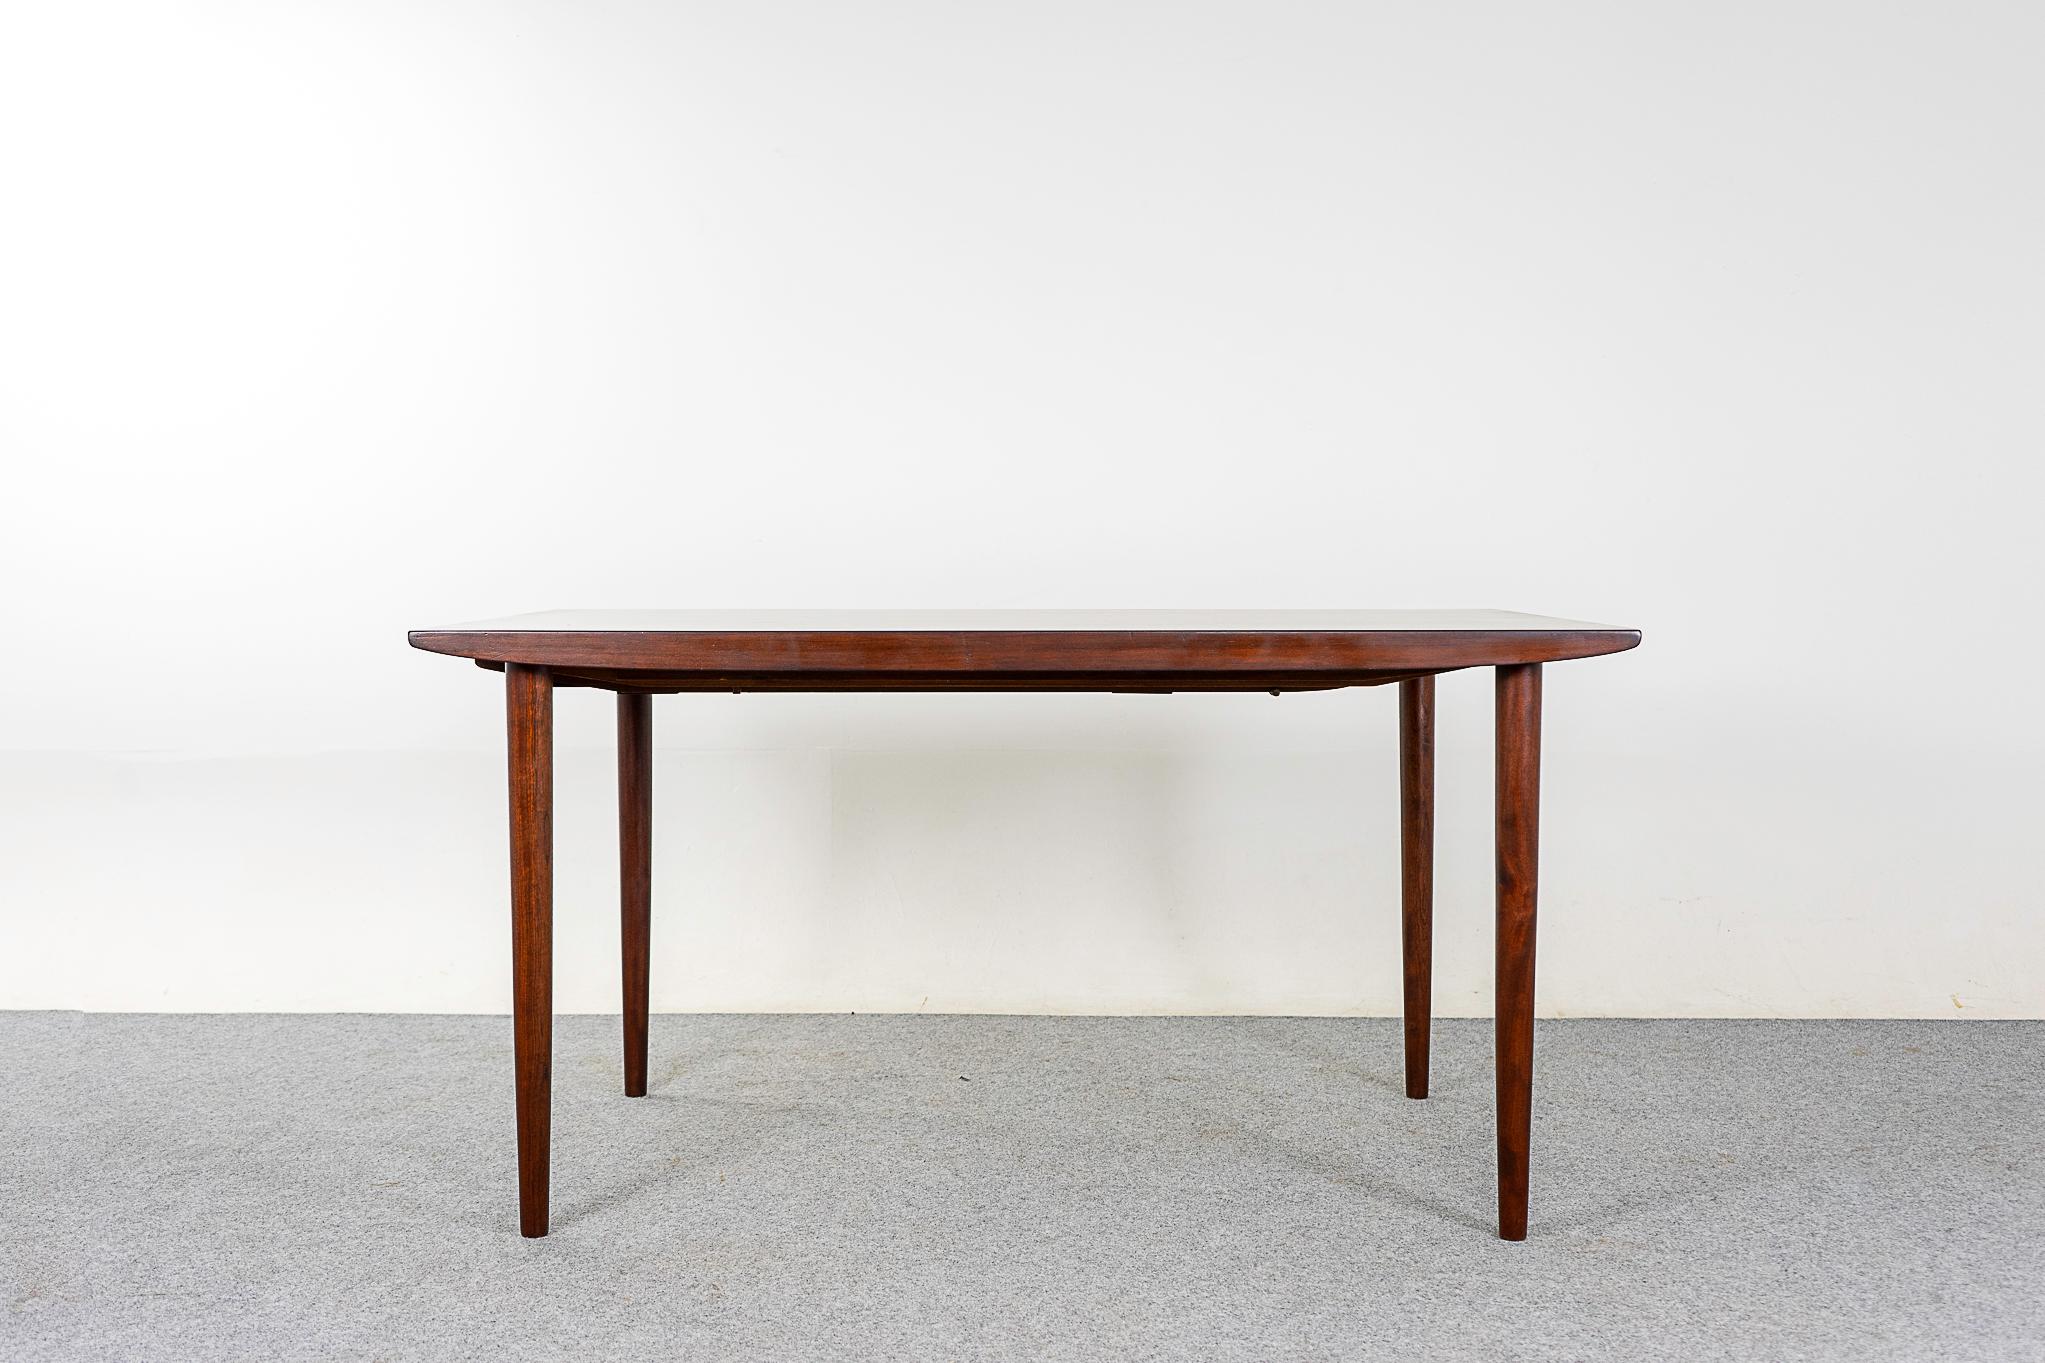 Rosewood Danish dining table, circa 1960's. Top is framed in solid wood edge trim,  center panels feature highly figured veneer with book-matched grain. Contrasting black leaves are conveniently stored under the table. 

55